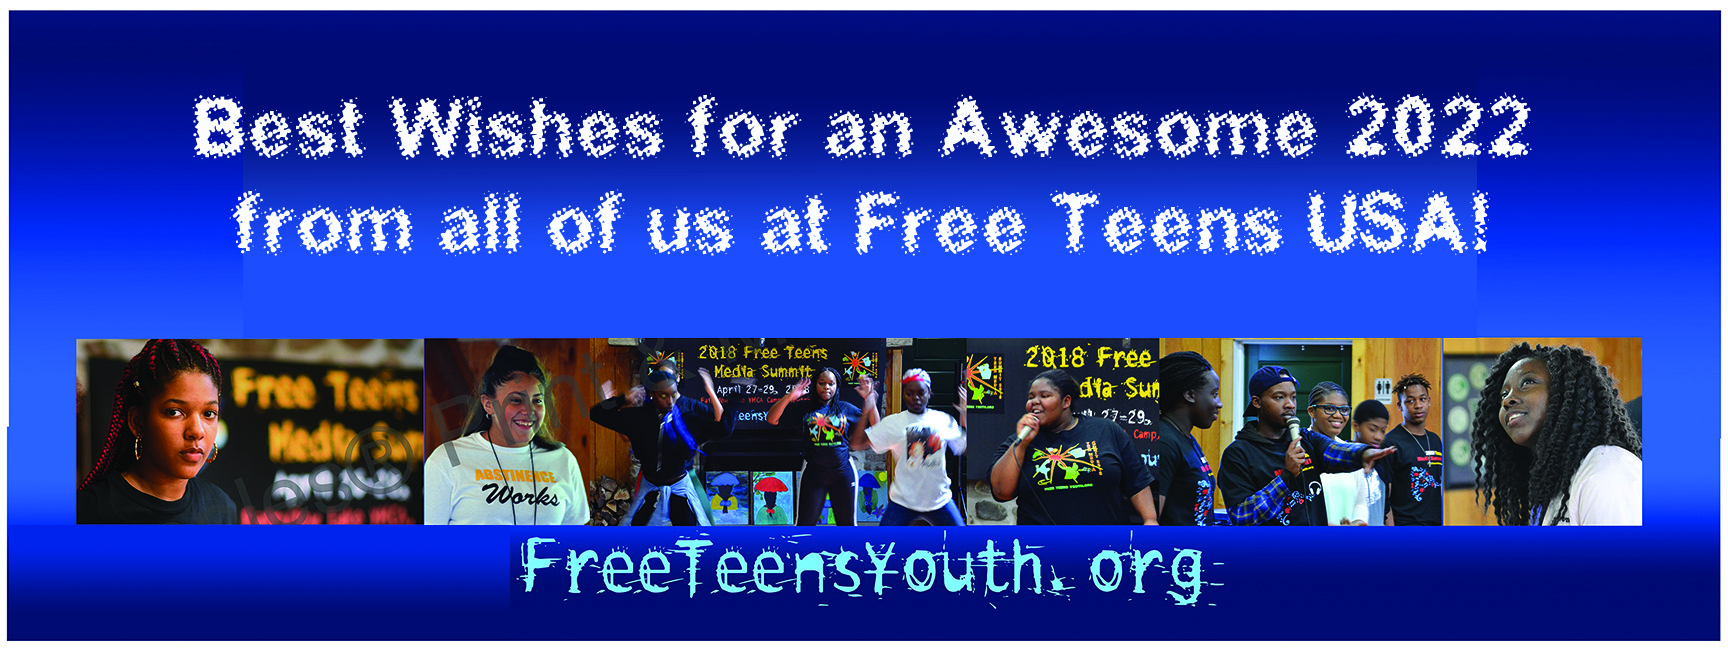 Free Teens USA Year End Report - Free Teens Youth - Changing Minds, Transforming Lives